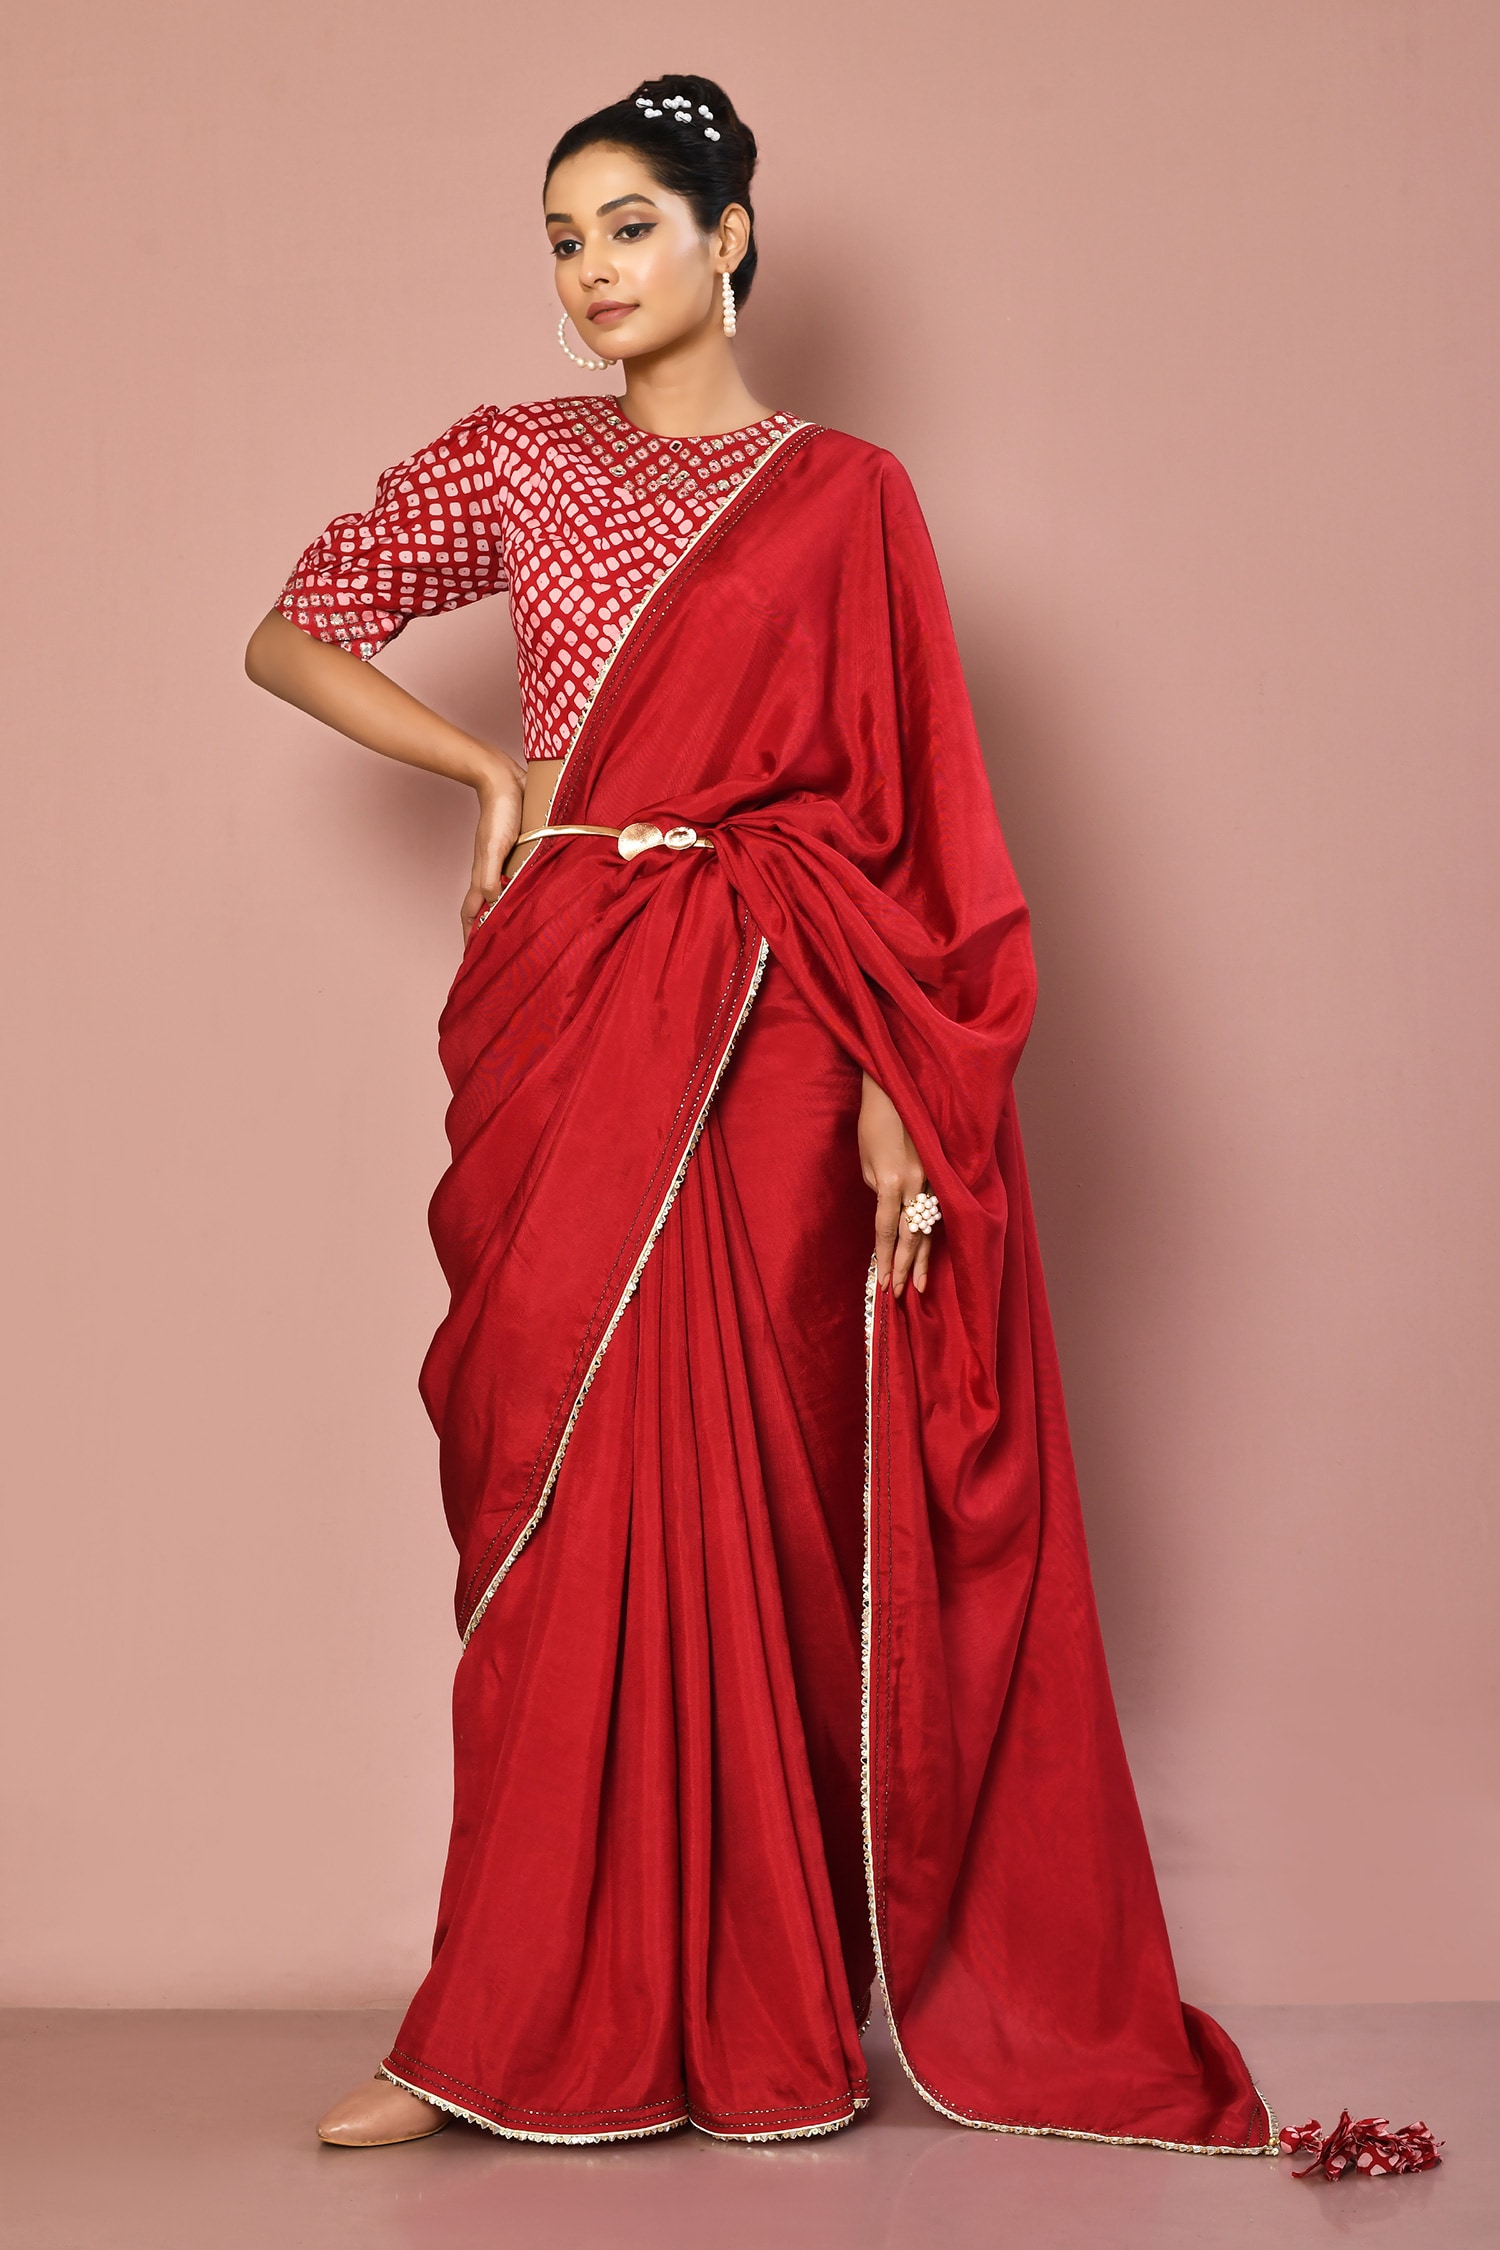 Nazaakat by Samara Singh - Red Muslin Printed Round Solid Saree With Blouse  For Women